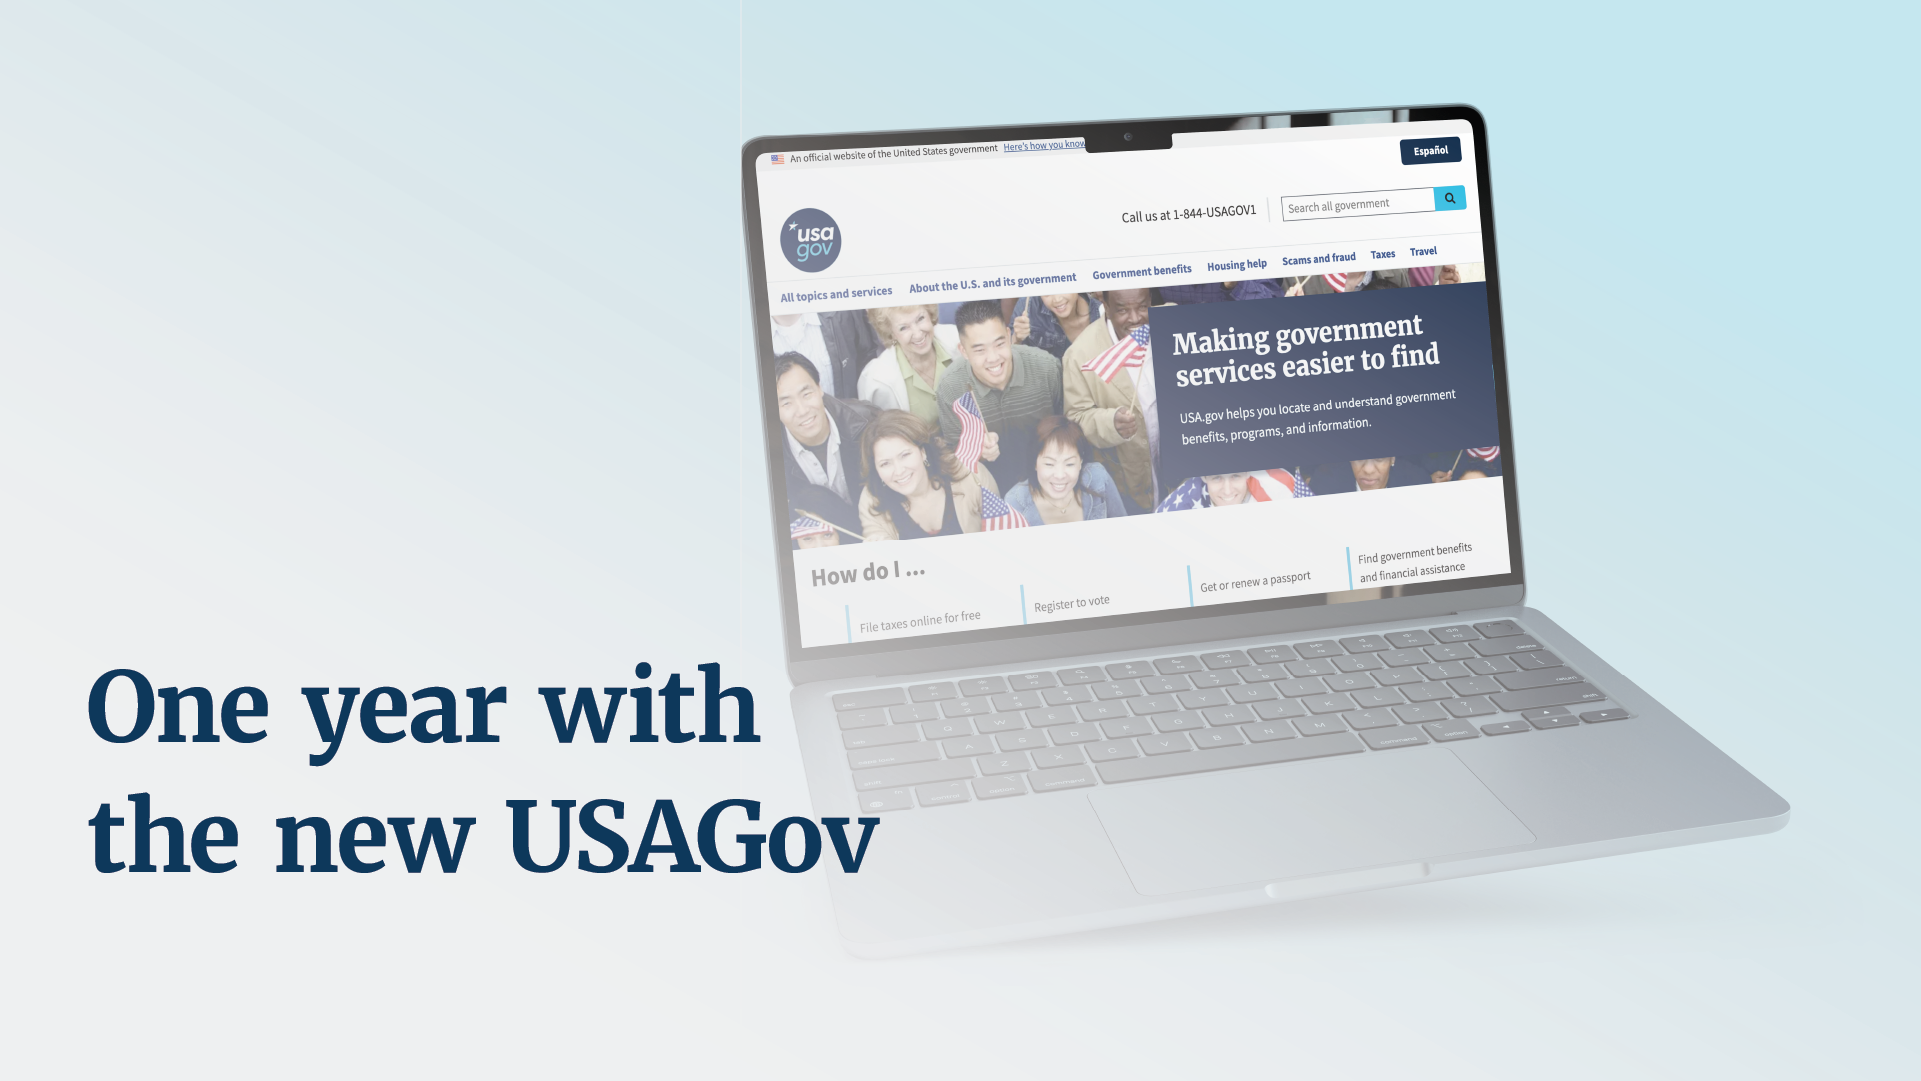 One year with the new USAGov